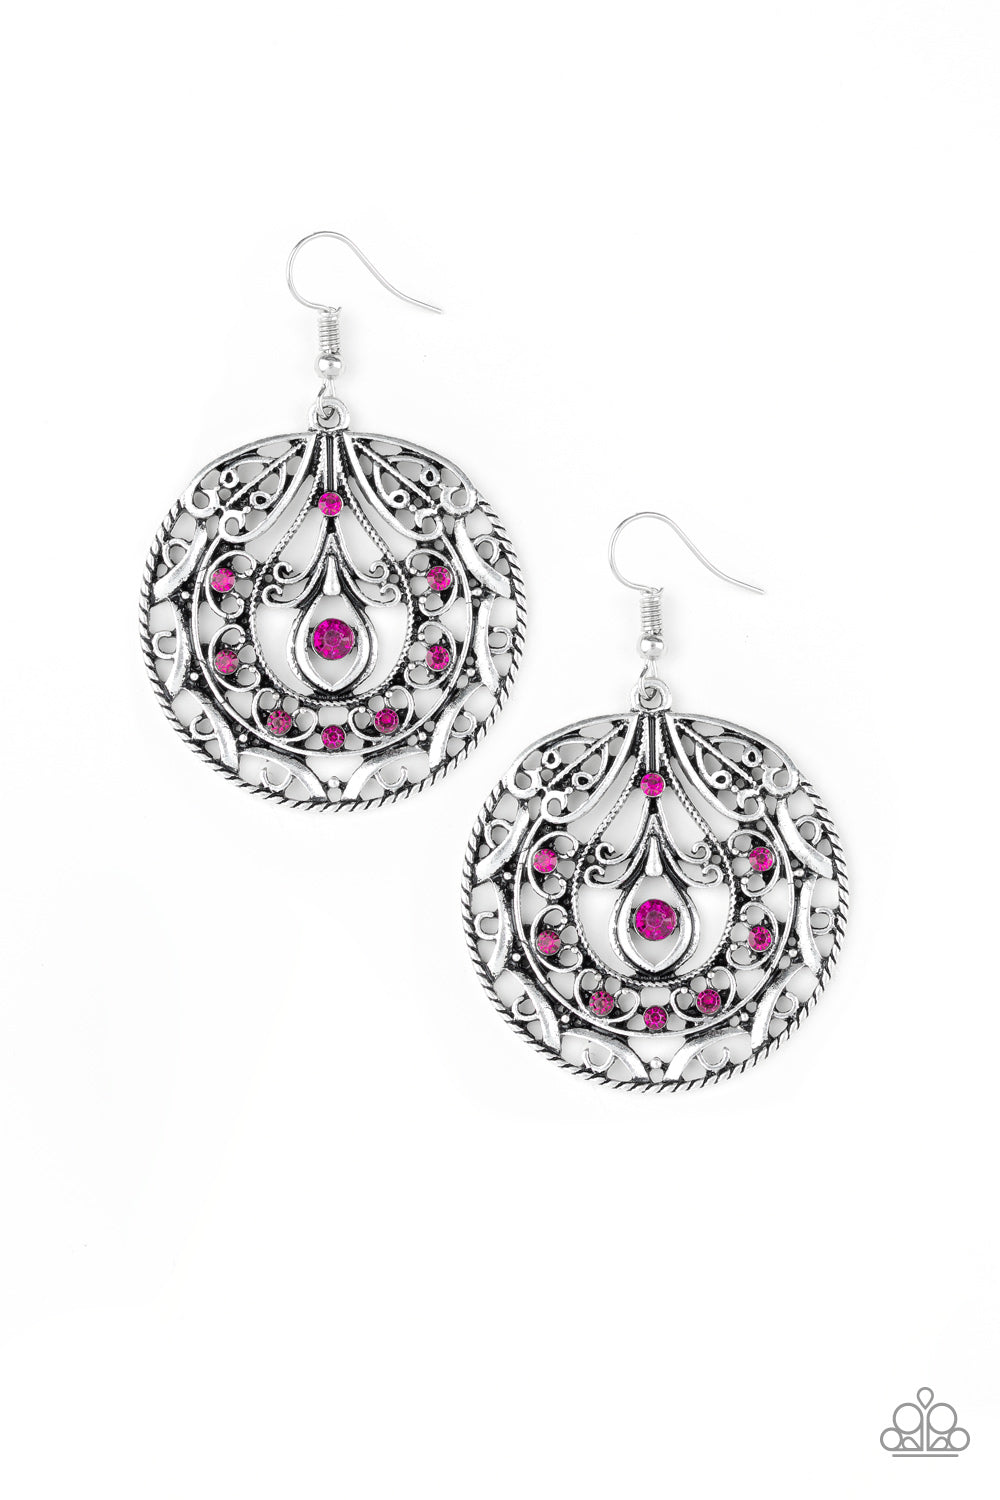 Choose To Sparkle - Pink Item #E443 Sparkling pink rhinestones are sprinkled along a swirling silver backdrop radiating with whimsical filigree. Earring attaches to a standard fishhook fitting. All Paparazzi Accessories are lead free and nickel free!  Sold as one pair of earrings.